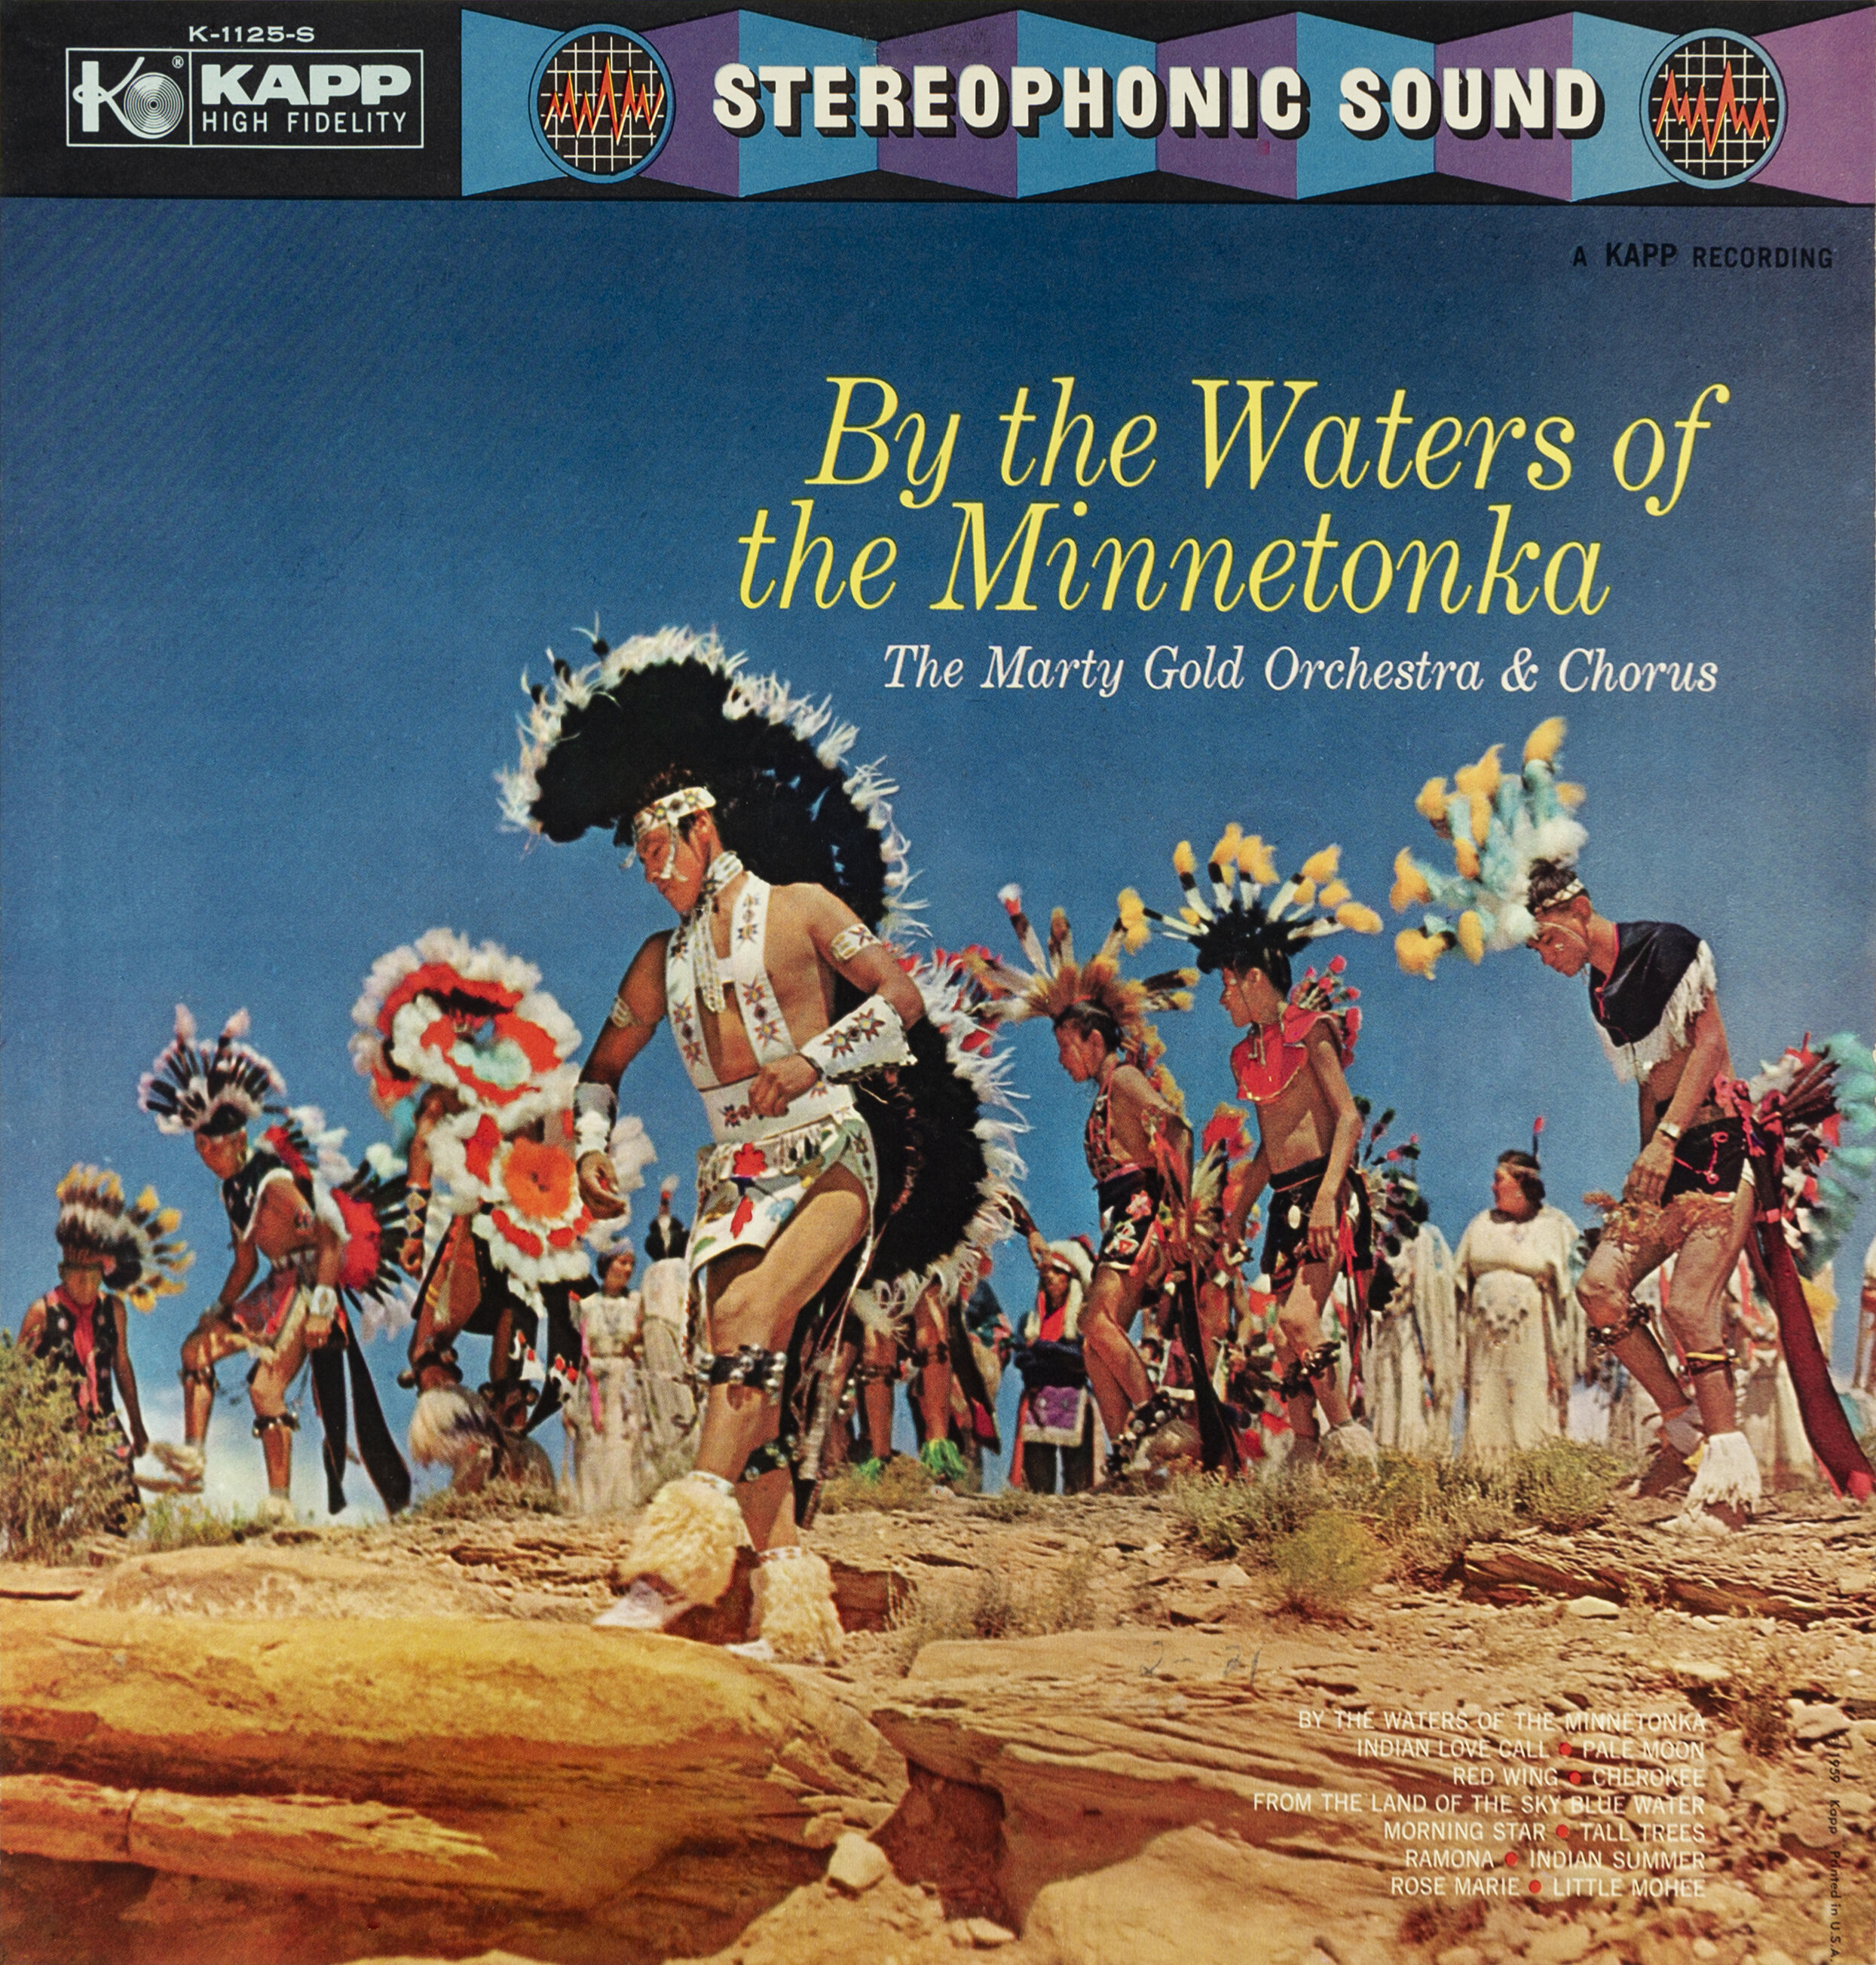 By the Waters of the Minnetonka - The Marty Gold Orchestra &amp; Chorus Album Cover